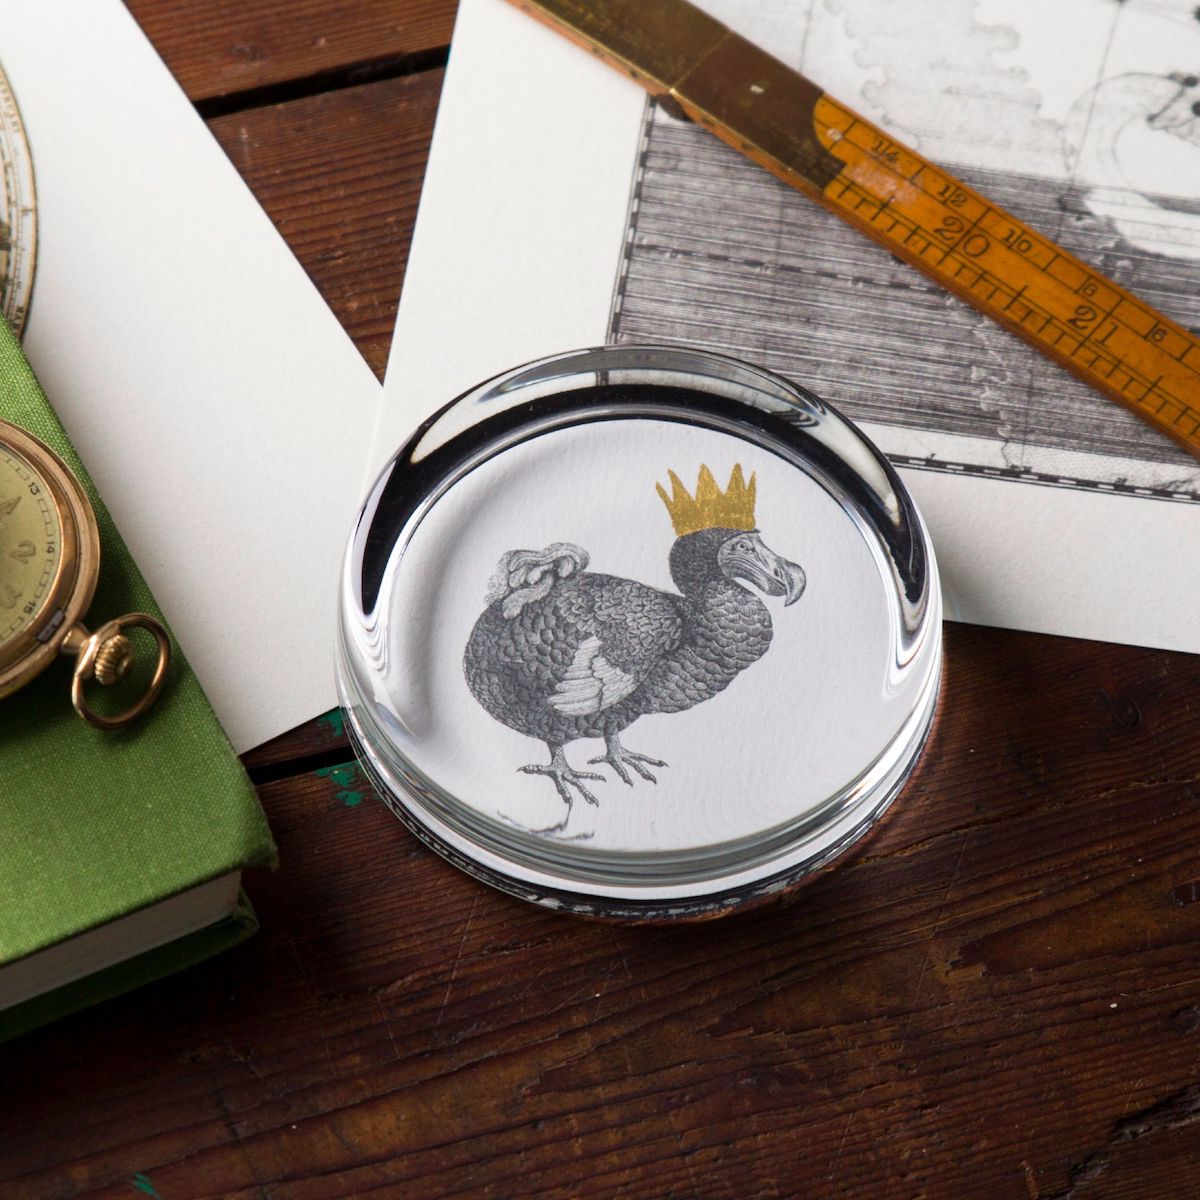 Dodo Paperweight by Mountain & Molehill for AUTHOR's collection of British-made luxury stationery